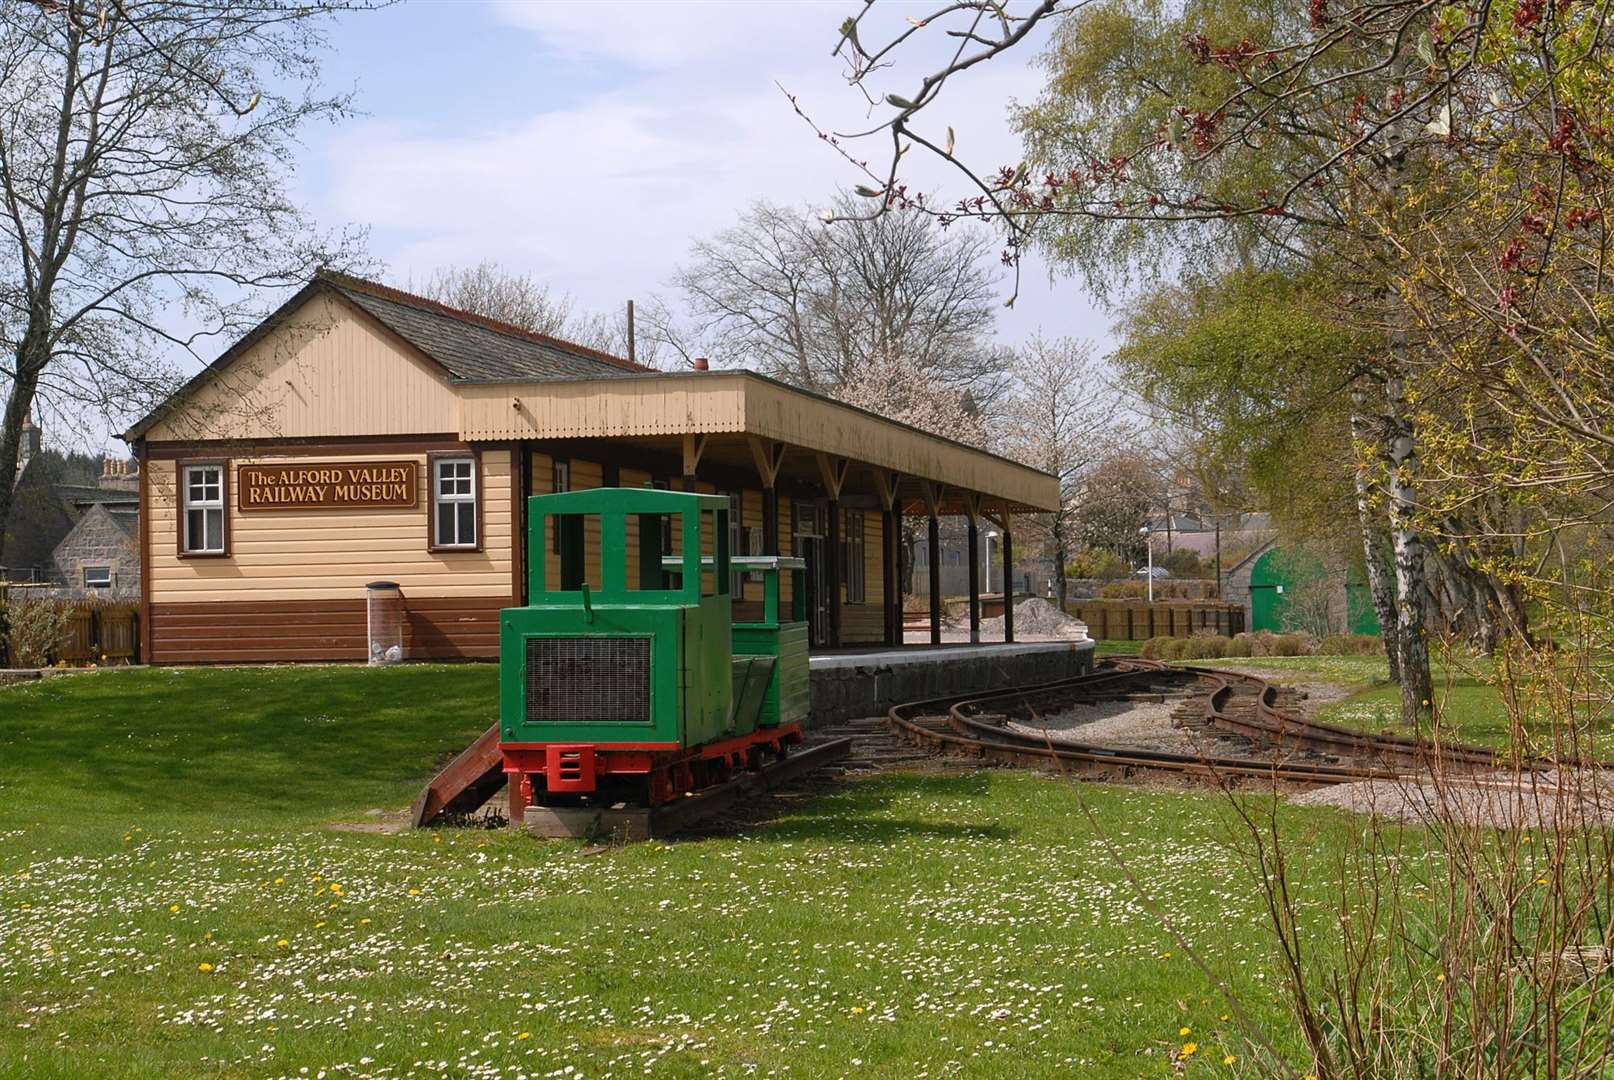 The Alford Railway Project has received £80,000.